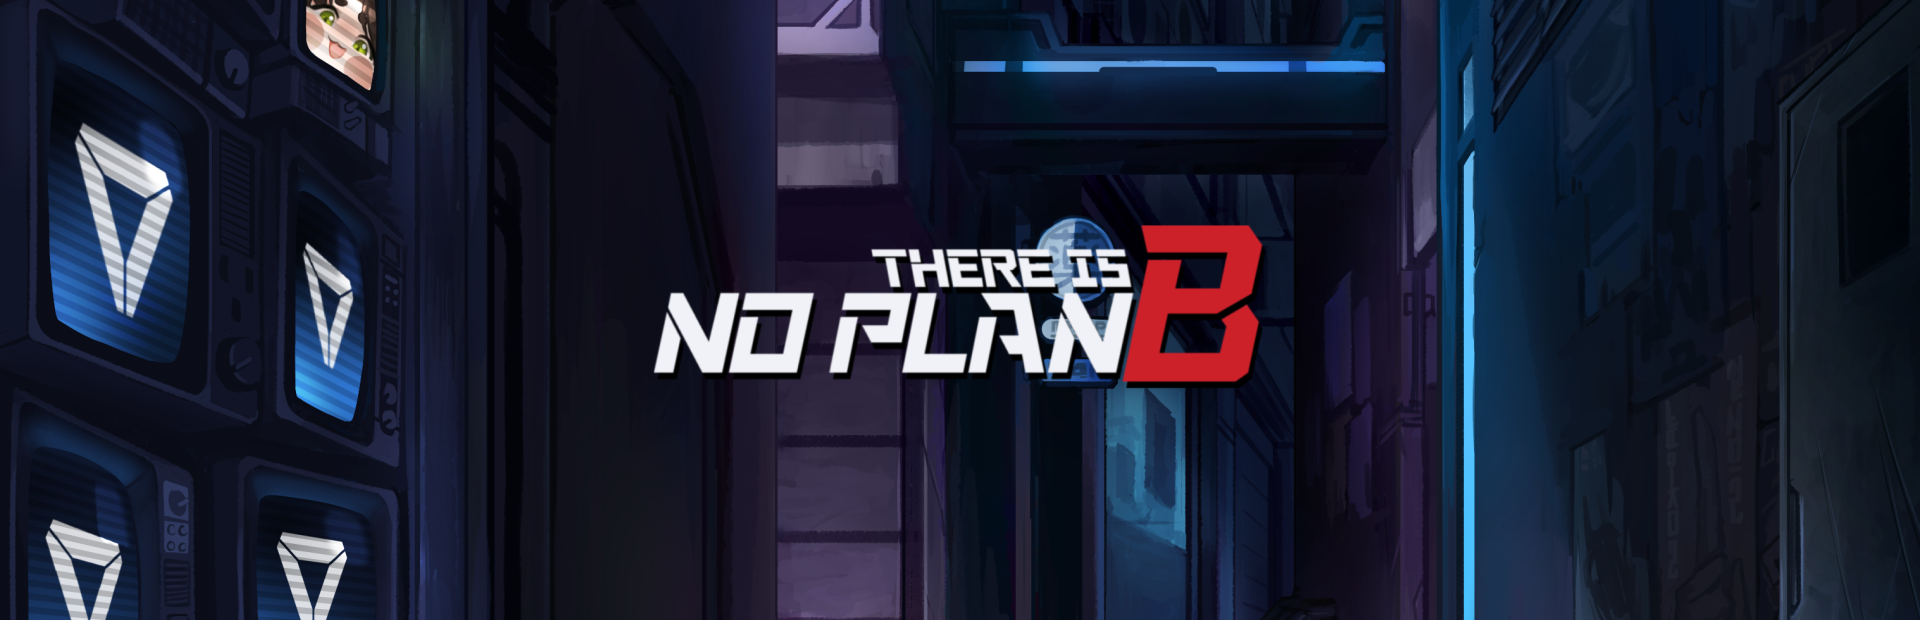 There is no Plan B - Episode 1 [수사편]